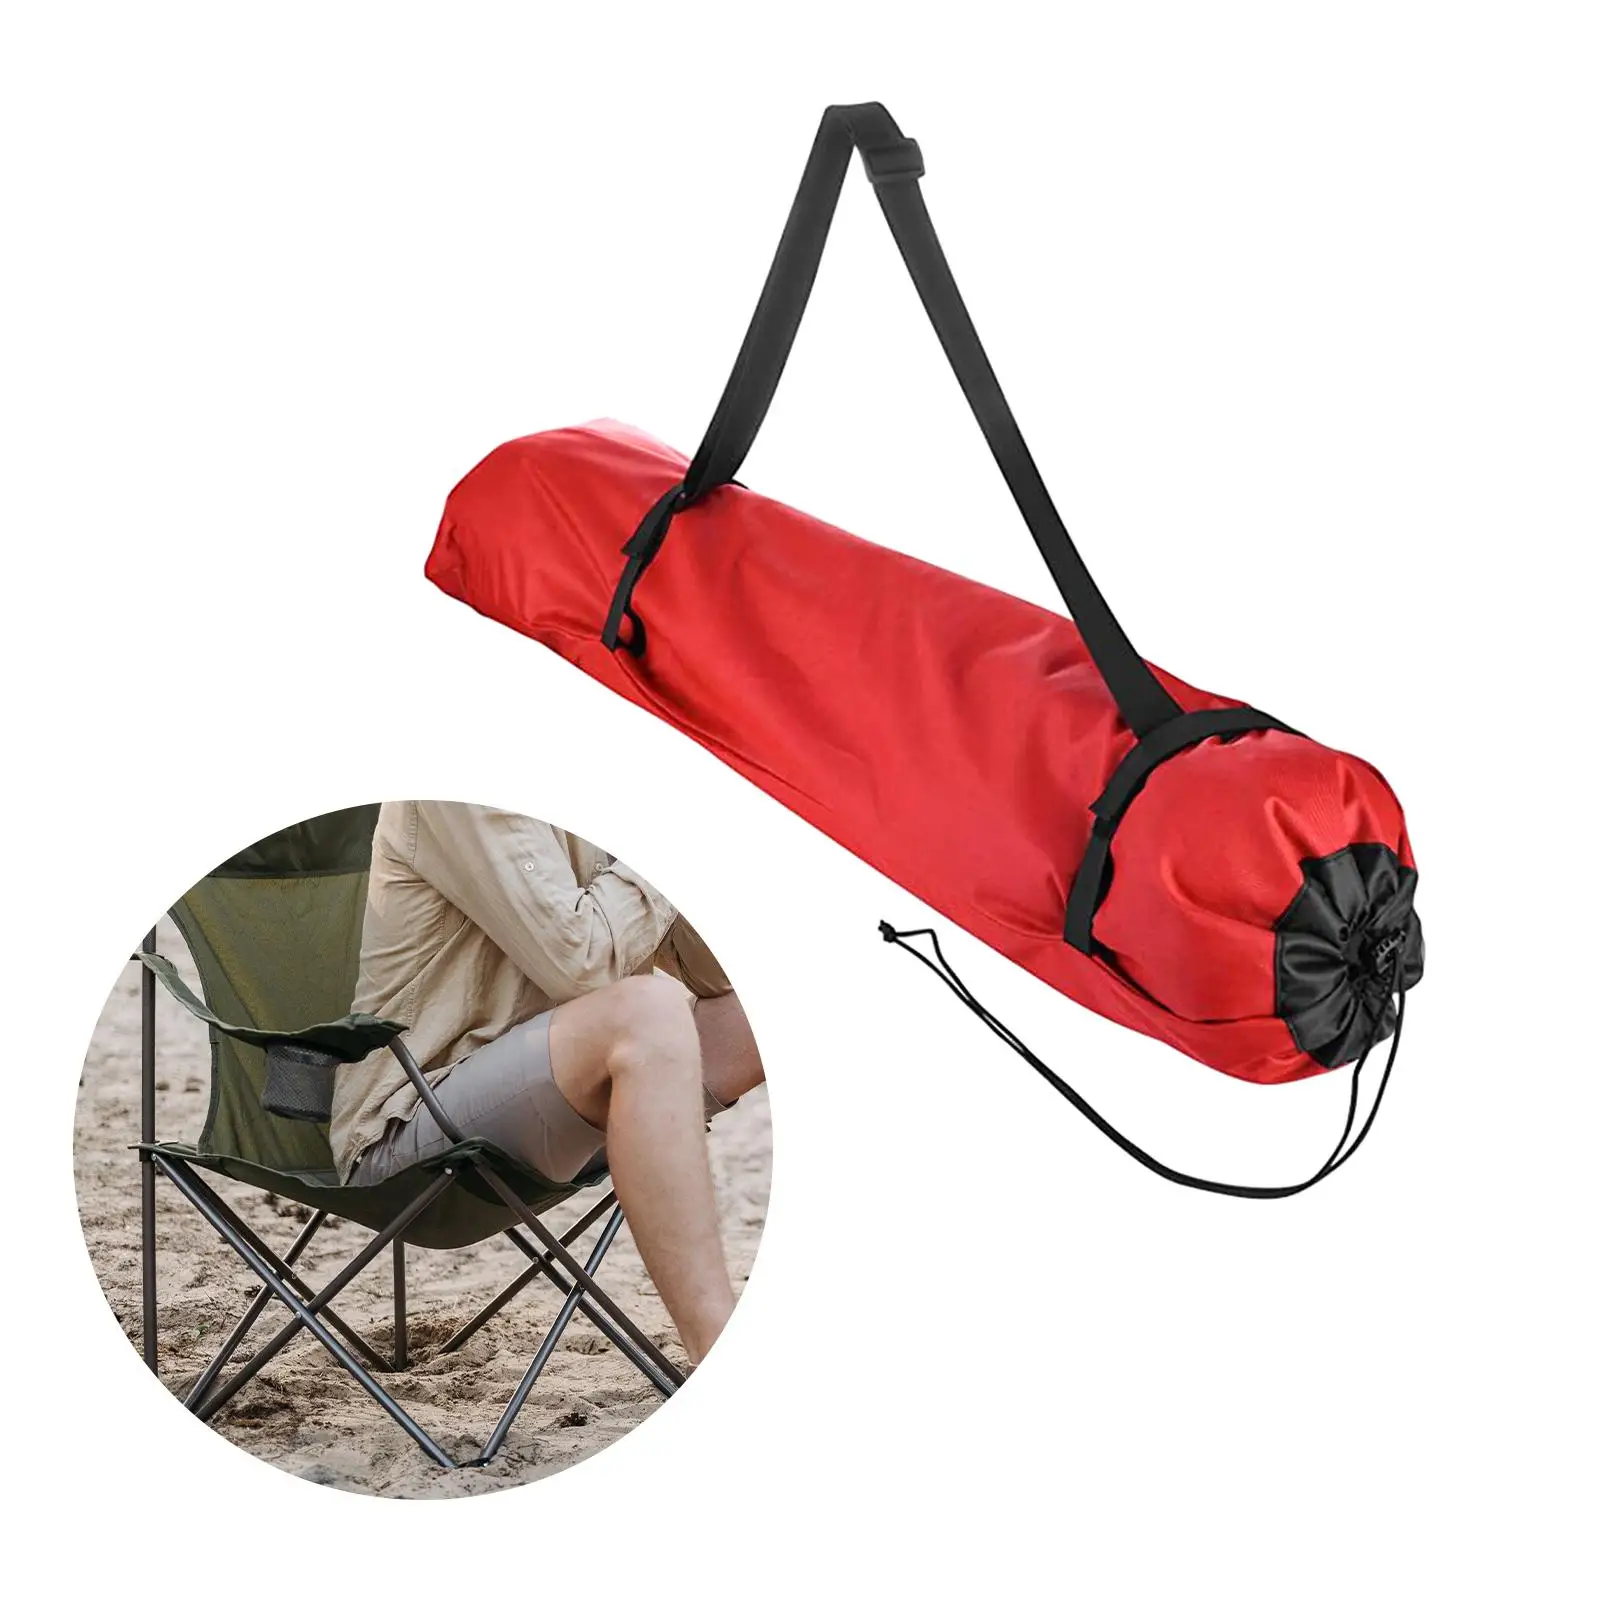 Camping Chair Bag, Moon Chair Storage Bag Large Capacity Folding Chair Carry Bag for Home Outdoor Backpacking Picnic Fishing